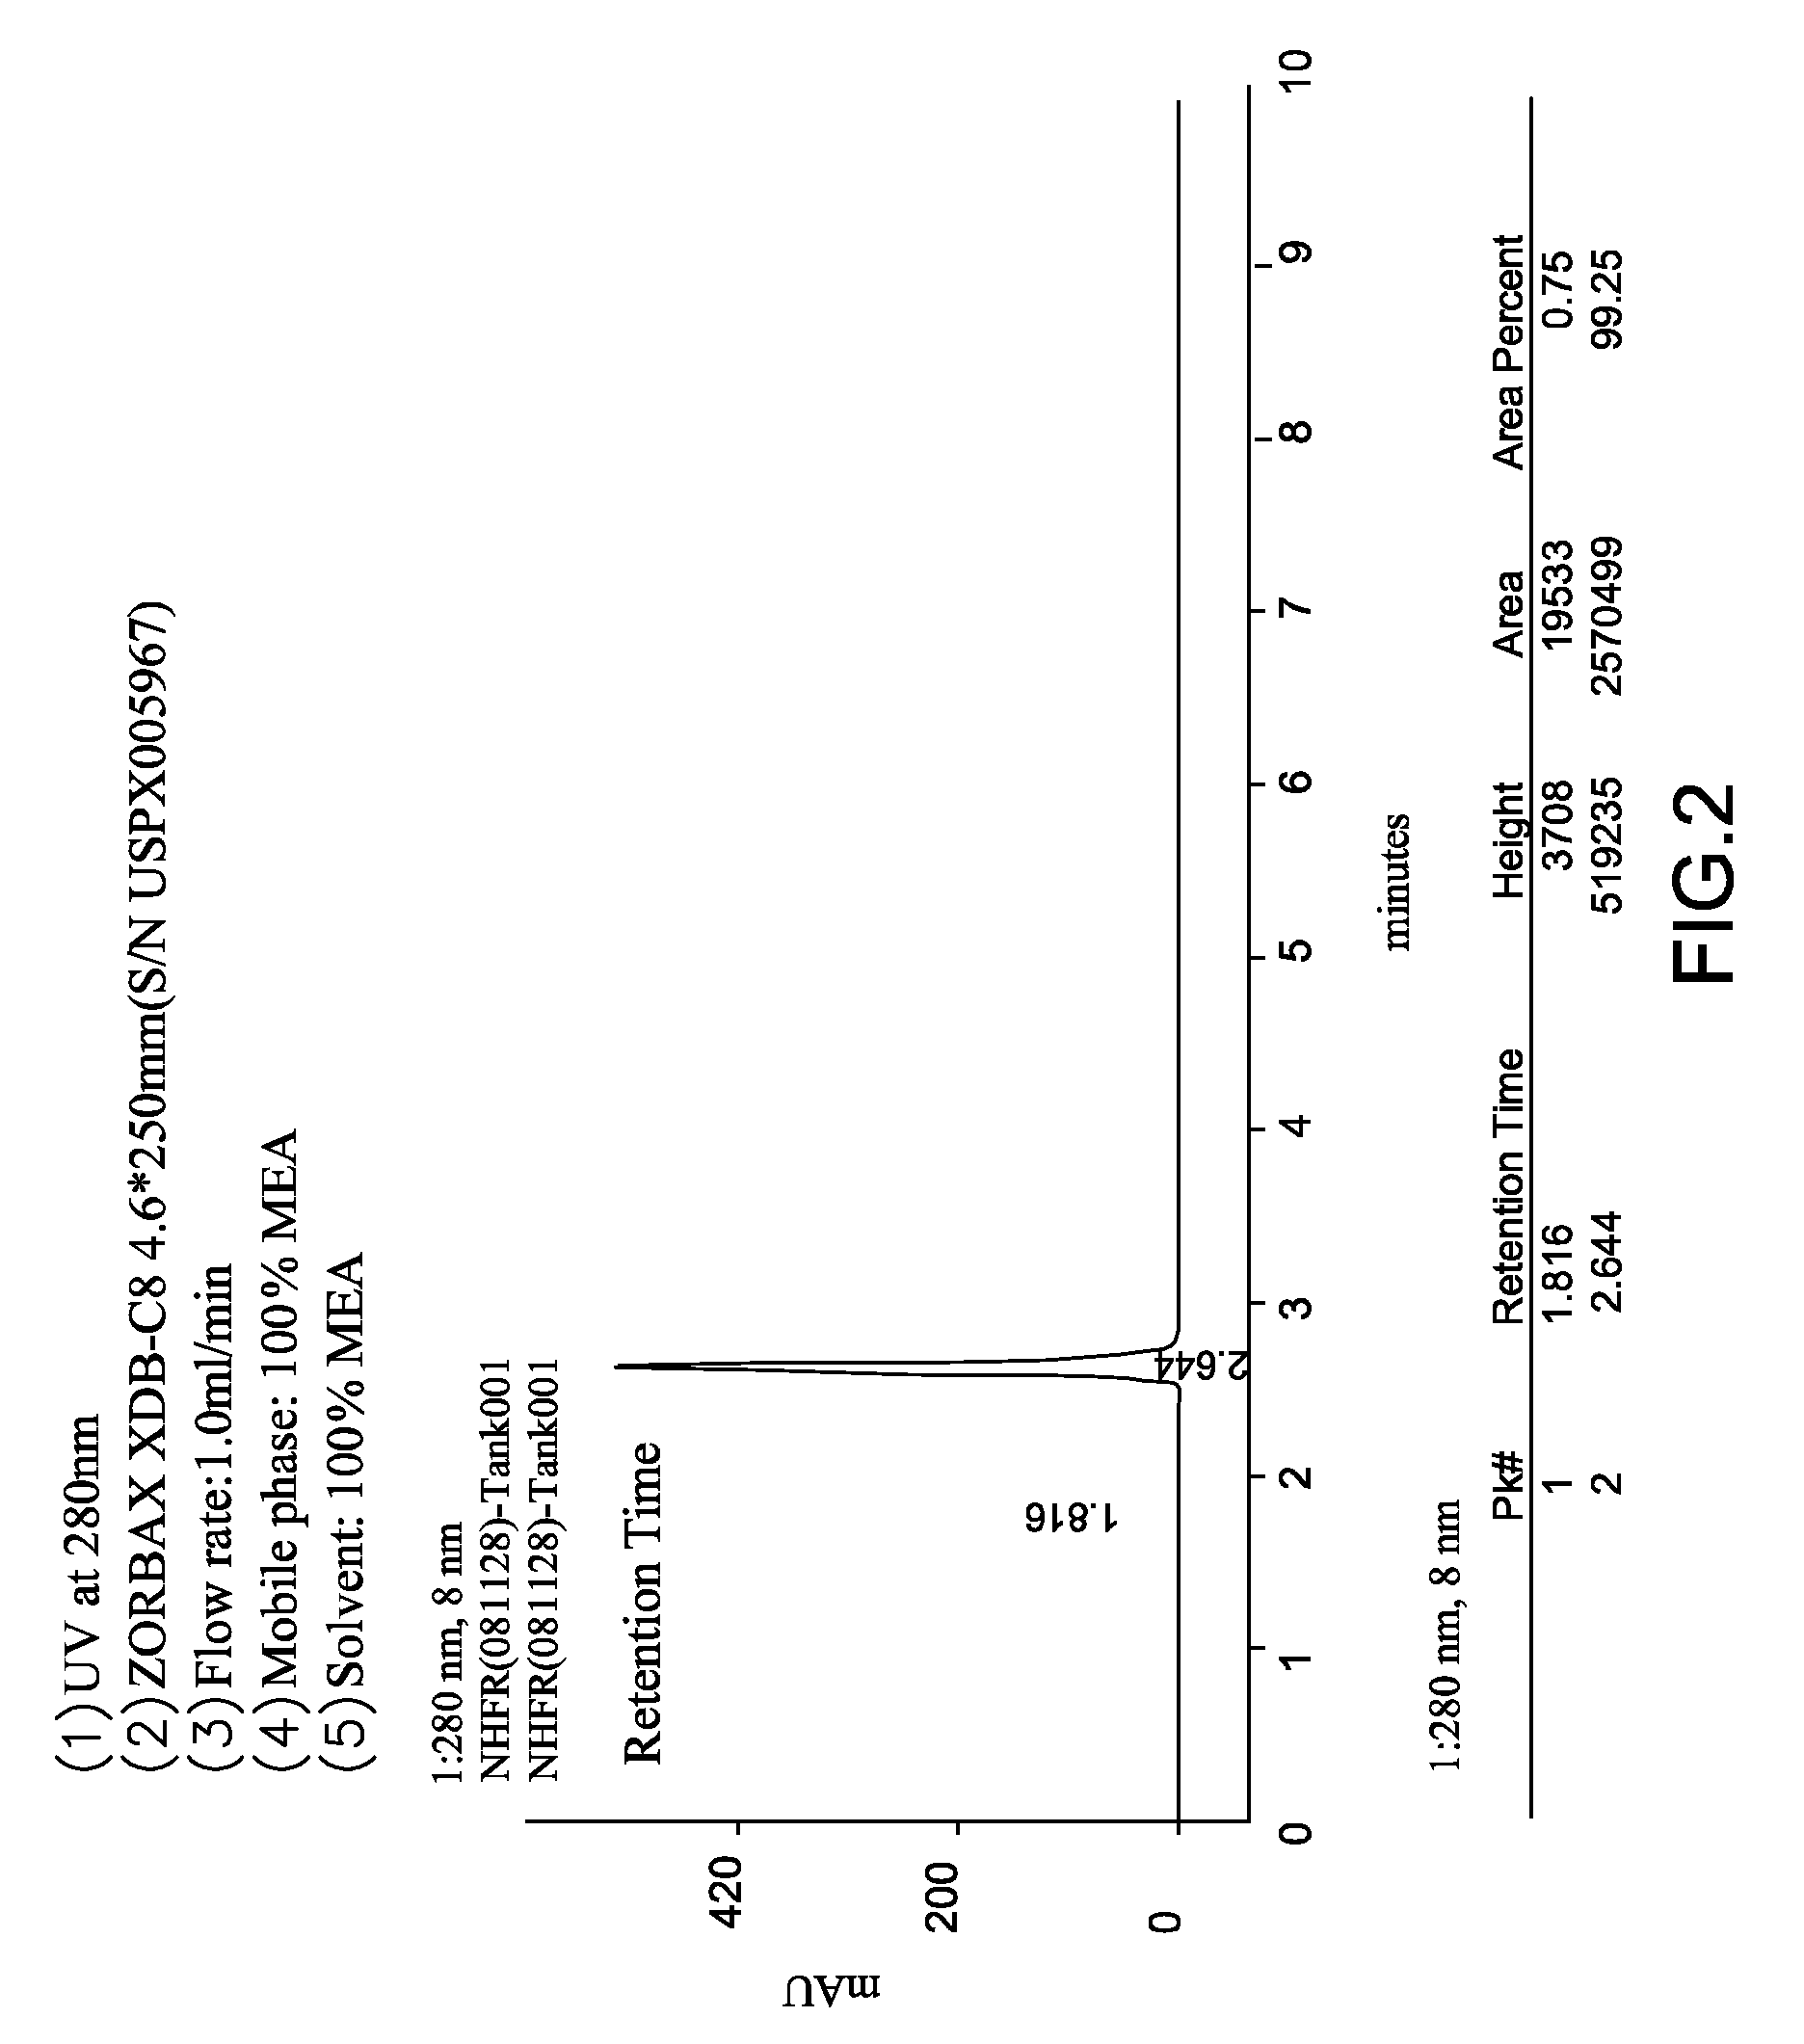 Method for synthesizing 9,10-dihydro-9-oxa-10-phosphaphenanthrene-10-oxide and derivatives thereof